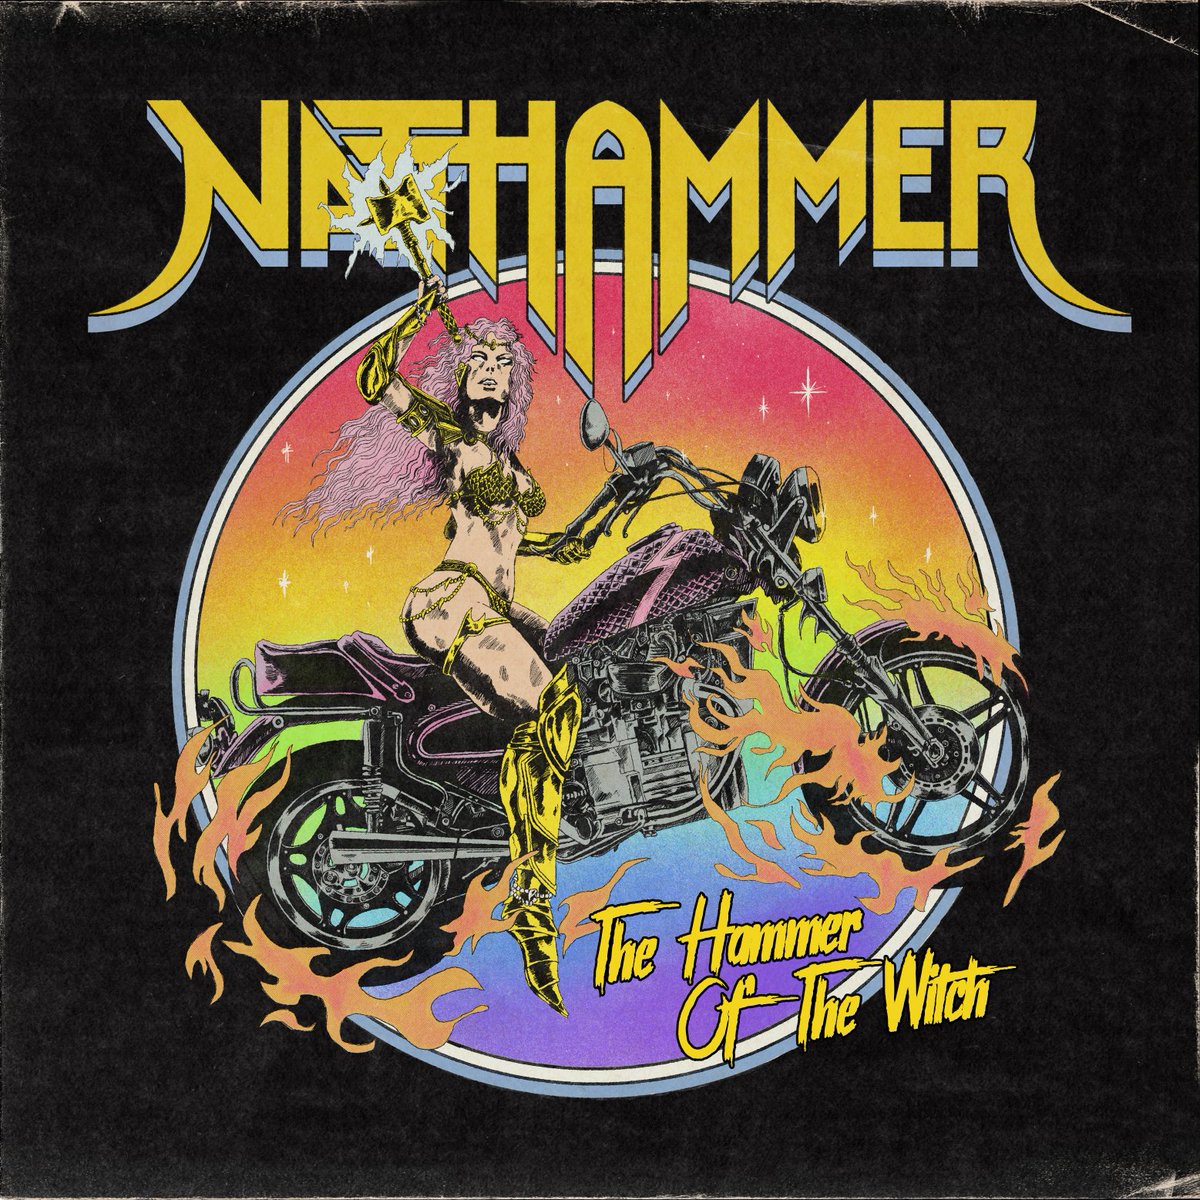 NATTHAMMER (Heavy Metal - Peru) - Their new album 'The Hammer of the Witch' is out now & streaming online #natthammer #heavymetal wp.me/p9NC0l-hWm